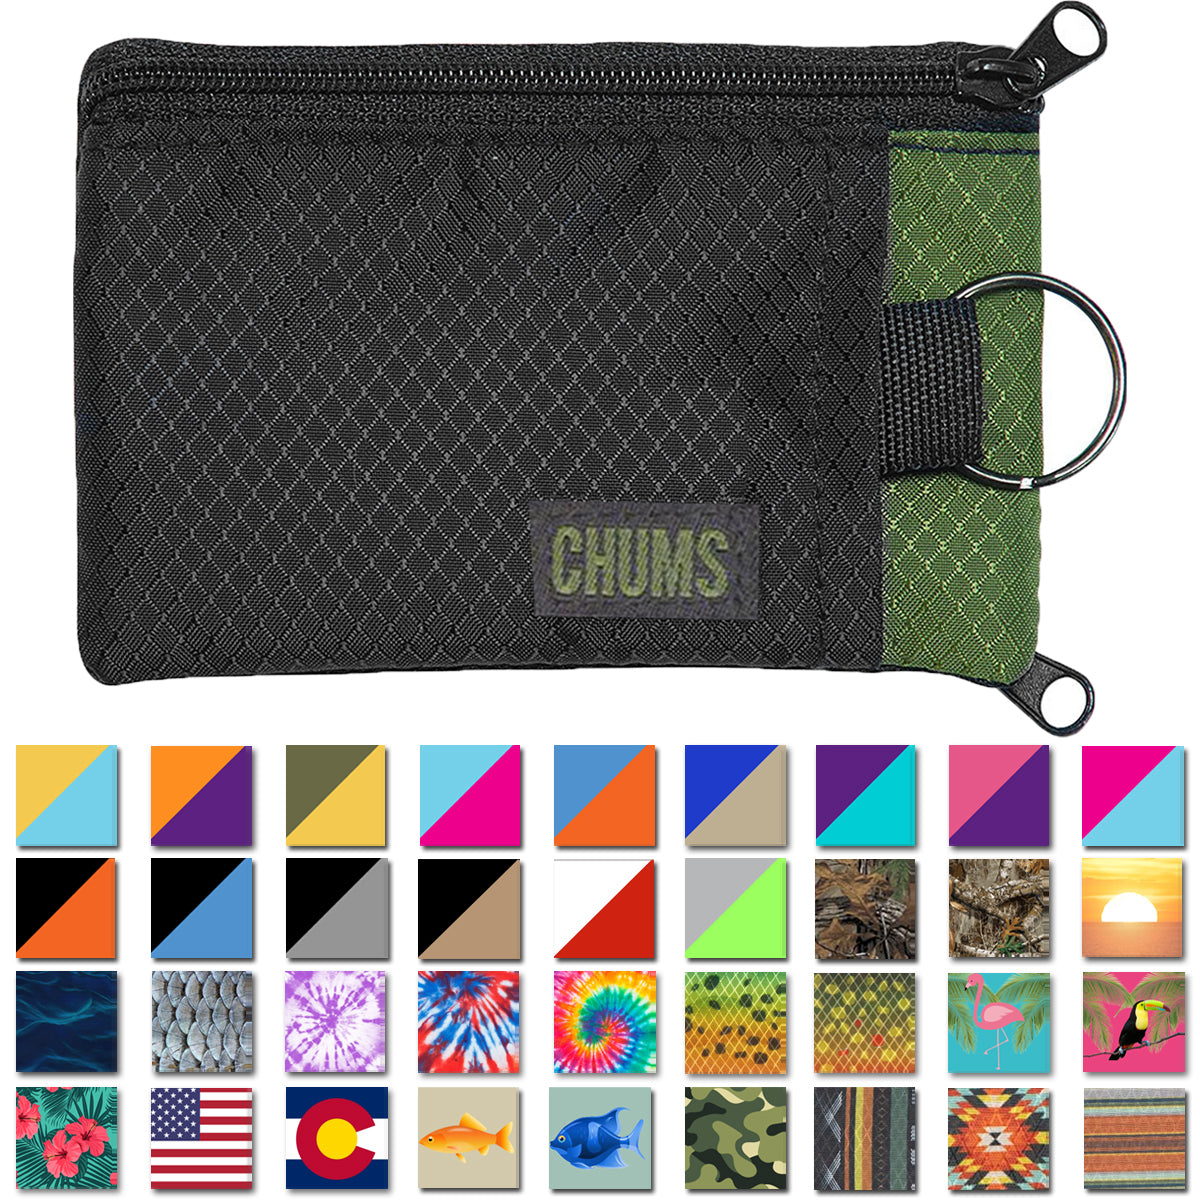 Chums Surfshorts Compact Rip-Stop Nylon Wallet Chums